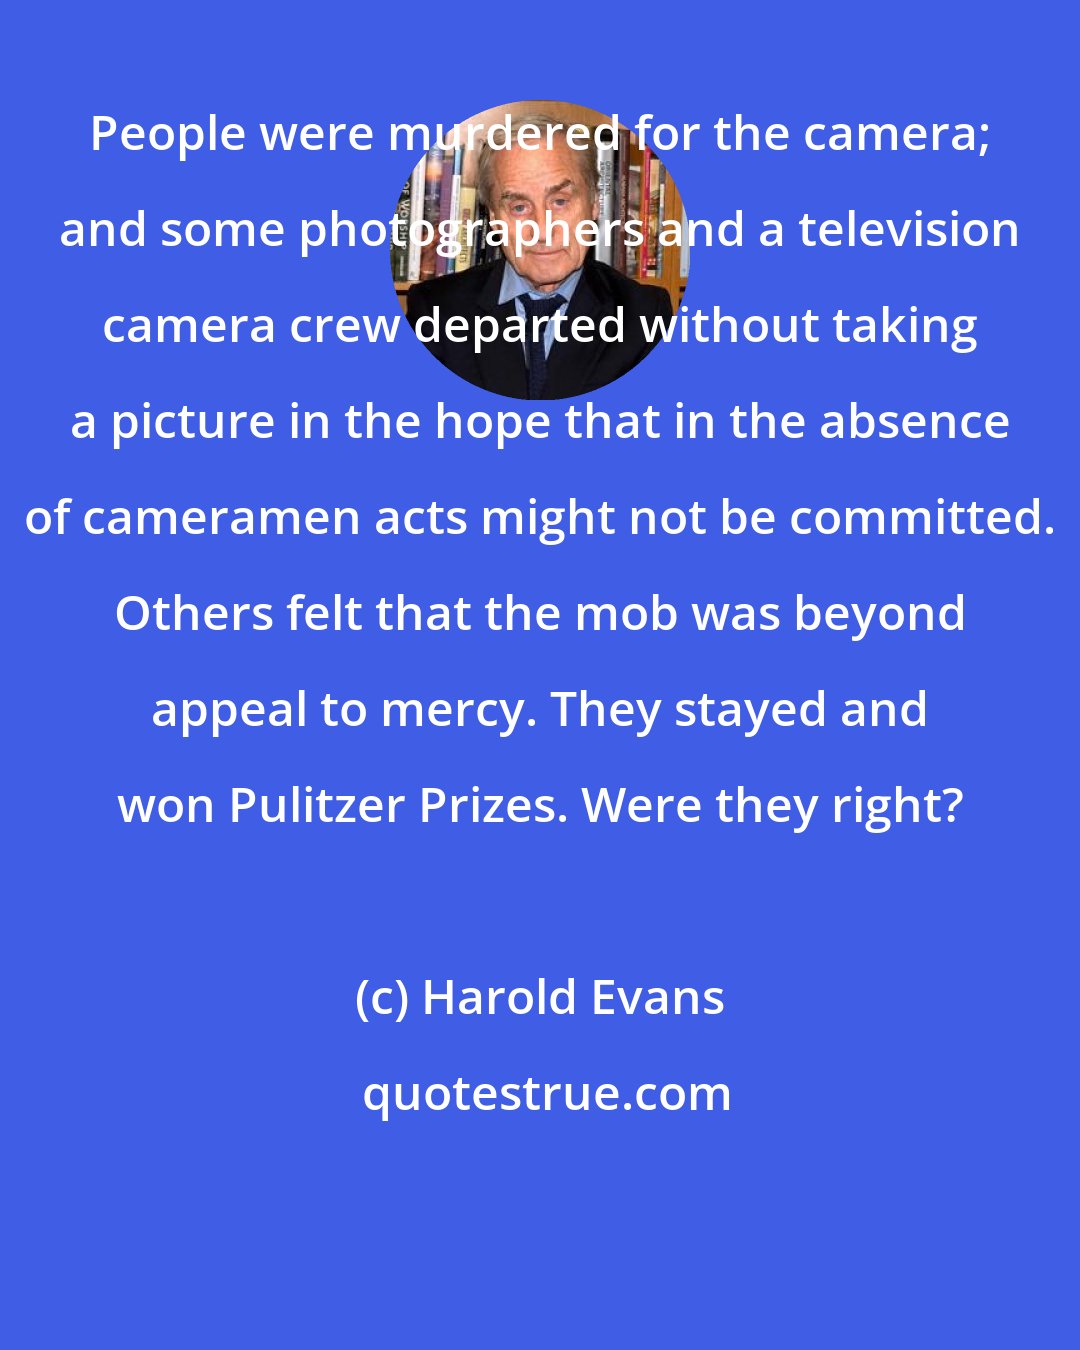 Harold Evans: People were murdered for the camera; and some photographers and a television camera crew departed without taking a picture in the hope that in the absence of cameramen acts might not be committed. Others felt that the mob was beyond appeal to mercy. They stayed and won Pulitzer Prizes. Were they right?